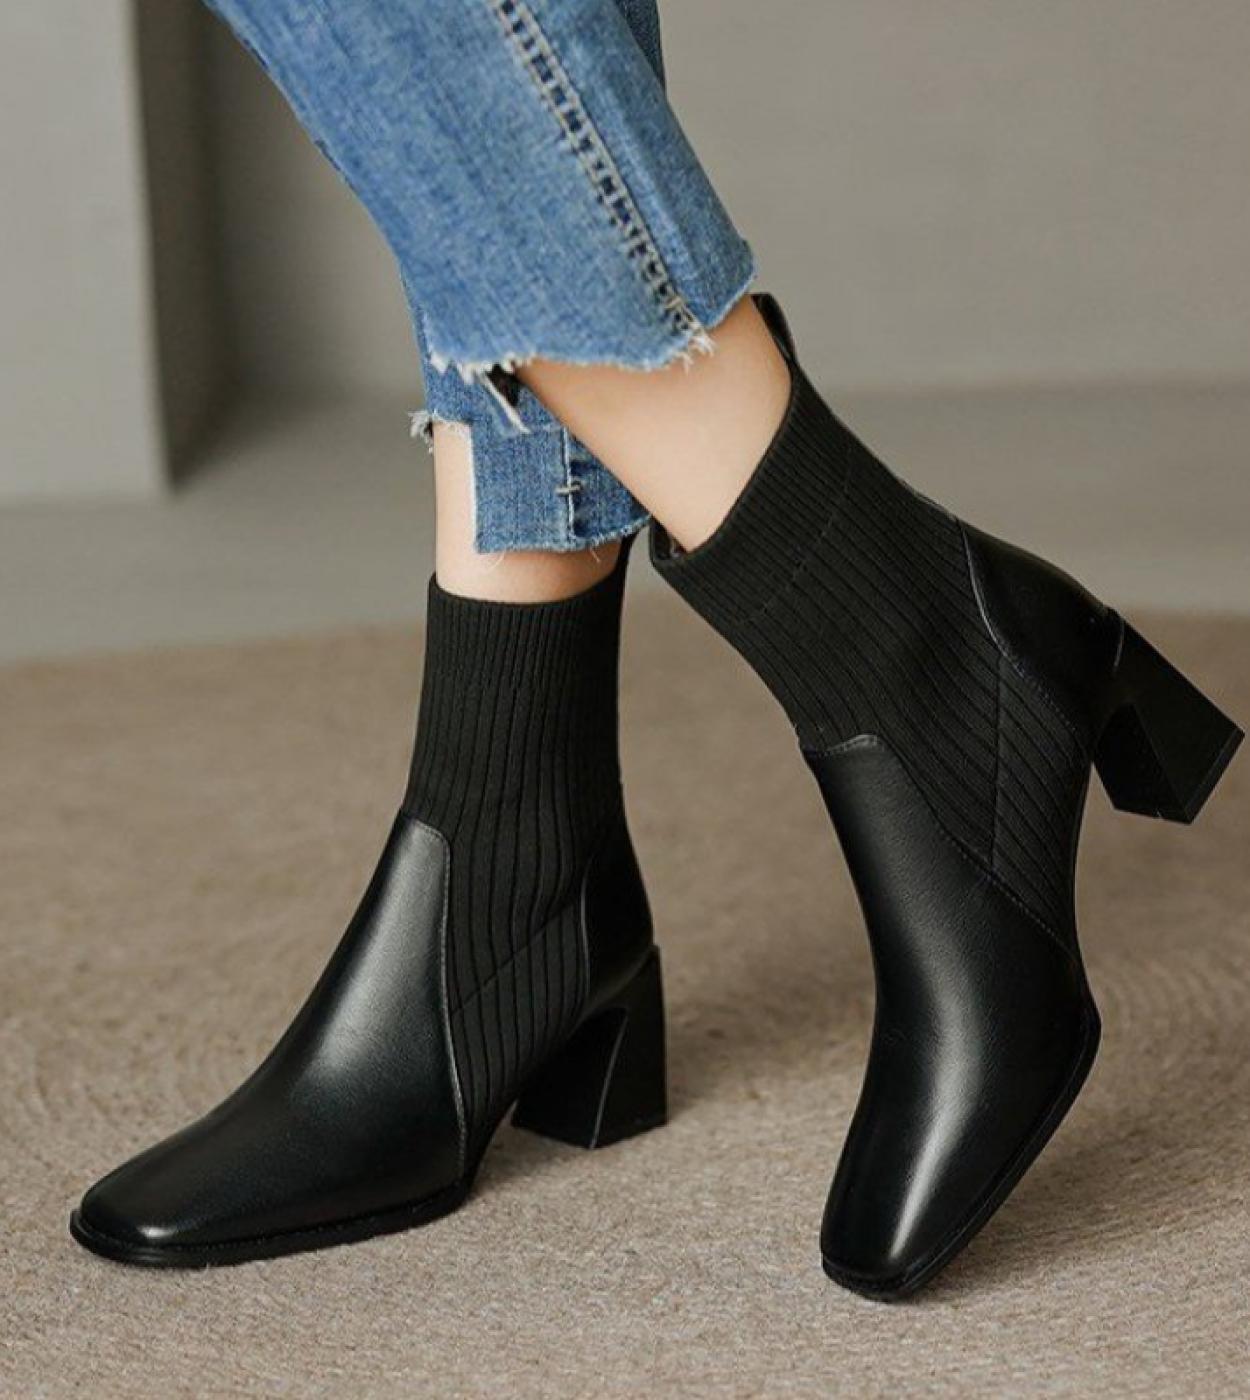 2022 Autumn Winter Women Boots Knit Elastic Socks Boots Square Toe Chunky Heel Boots Fashion Ankle Chelsea Boots  Women